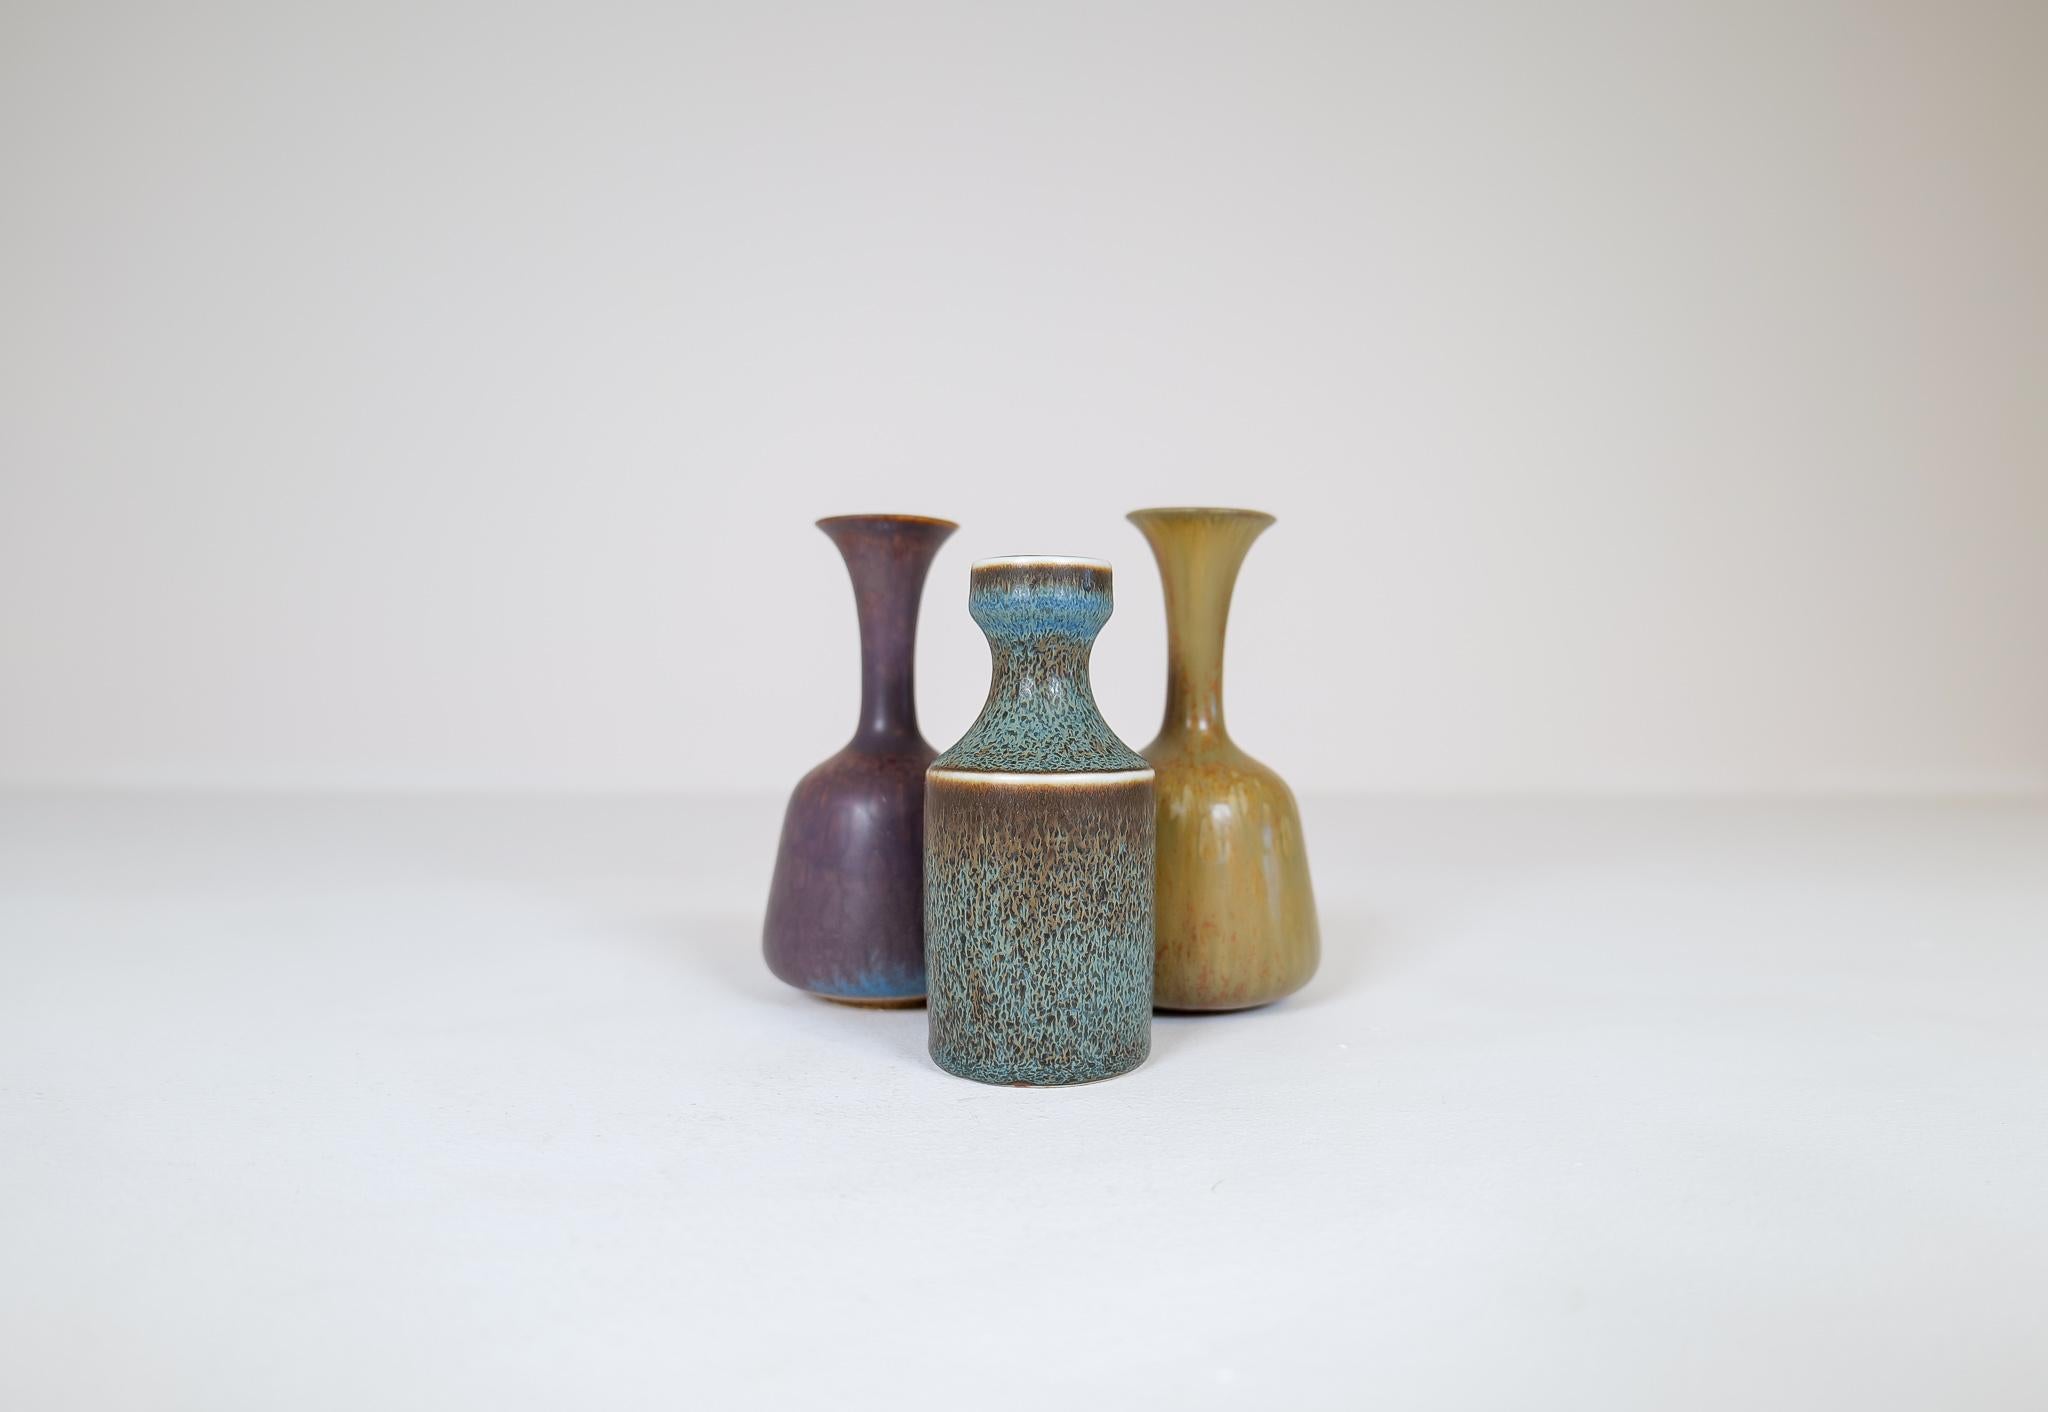 Three wonderful vases from Rörstrand and maker, designer Gunnar Nylund. Made in Sweden in the midcentury. Beautiful, glazed vases with wonderful curves. The craftsmanship on these vases is stunning. The way that the shape and lines of the vases